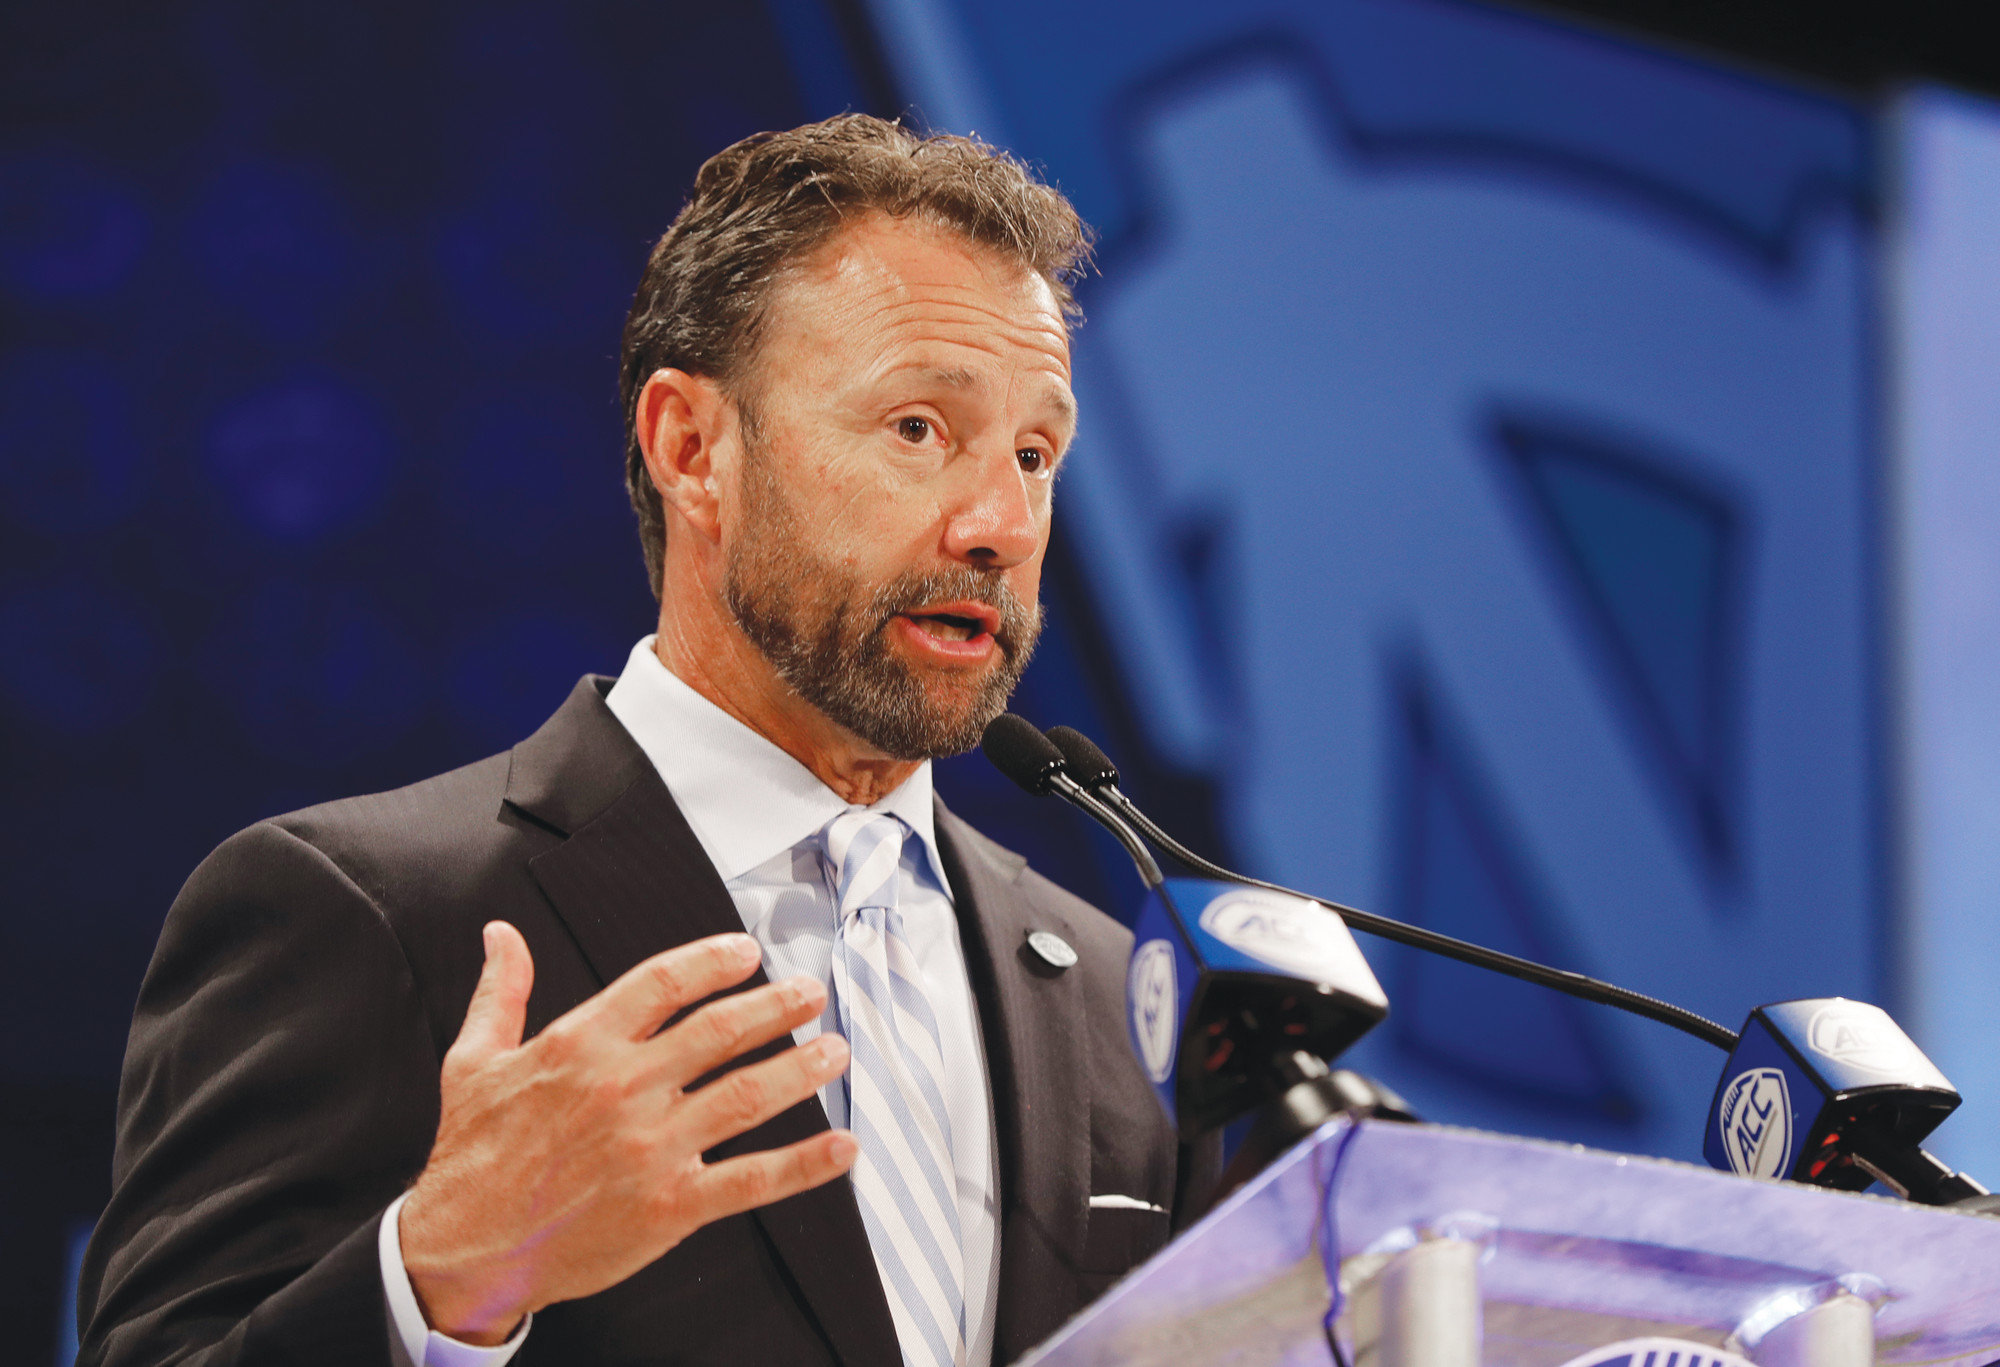 North Carolina head coach Larry Fedora answers a question during a news conference at the NCAA Atlantic Coast Conference college football media day in Charlotte on Wednesday.